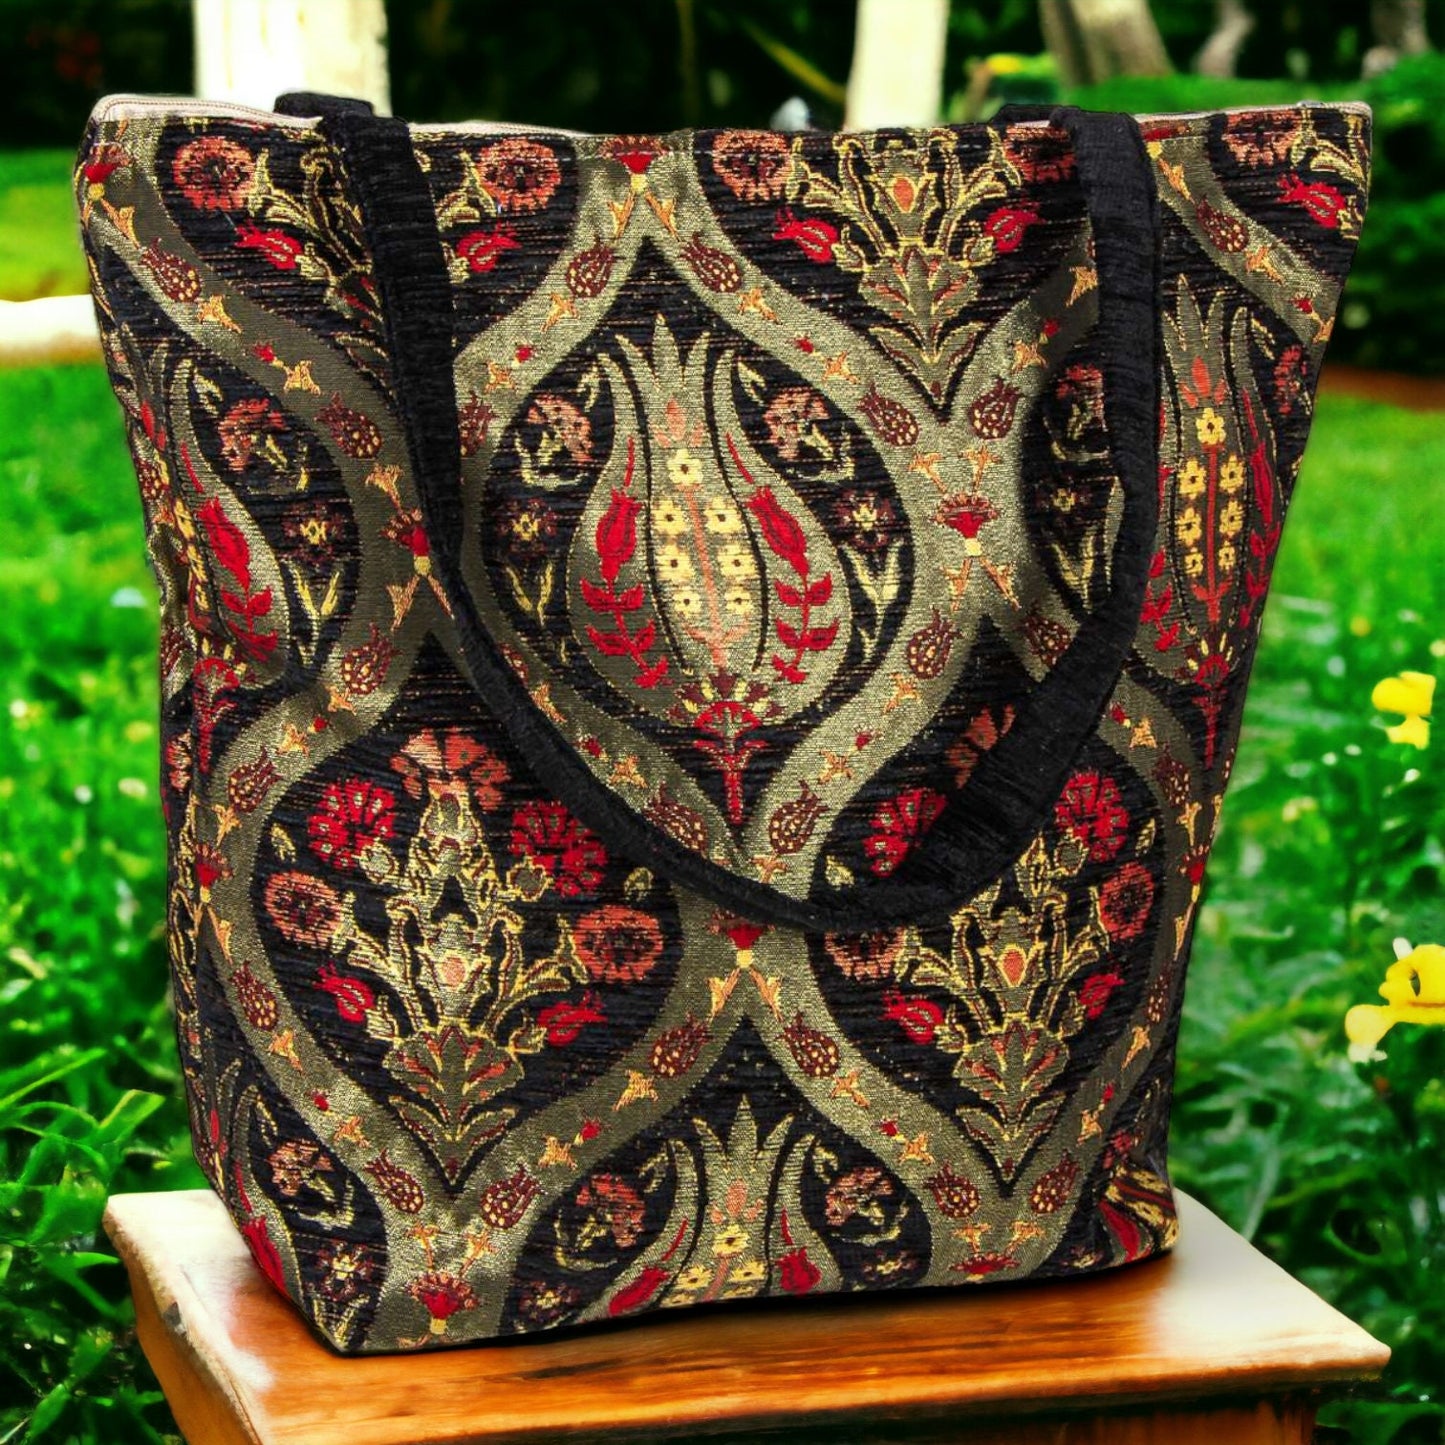 Authentic Kilim Fabric Ottoman Design Purse with Handles, Turkish Carpet, Beach Bag, Tote, Reusable Shopping Bag -- Black/Gold/Red